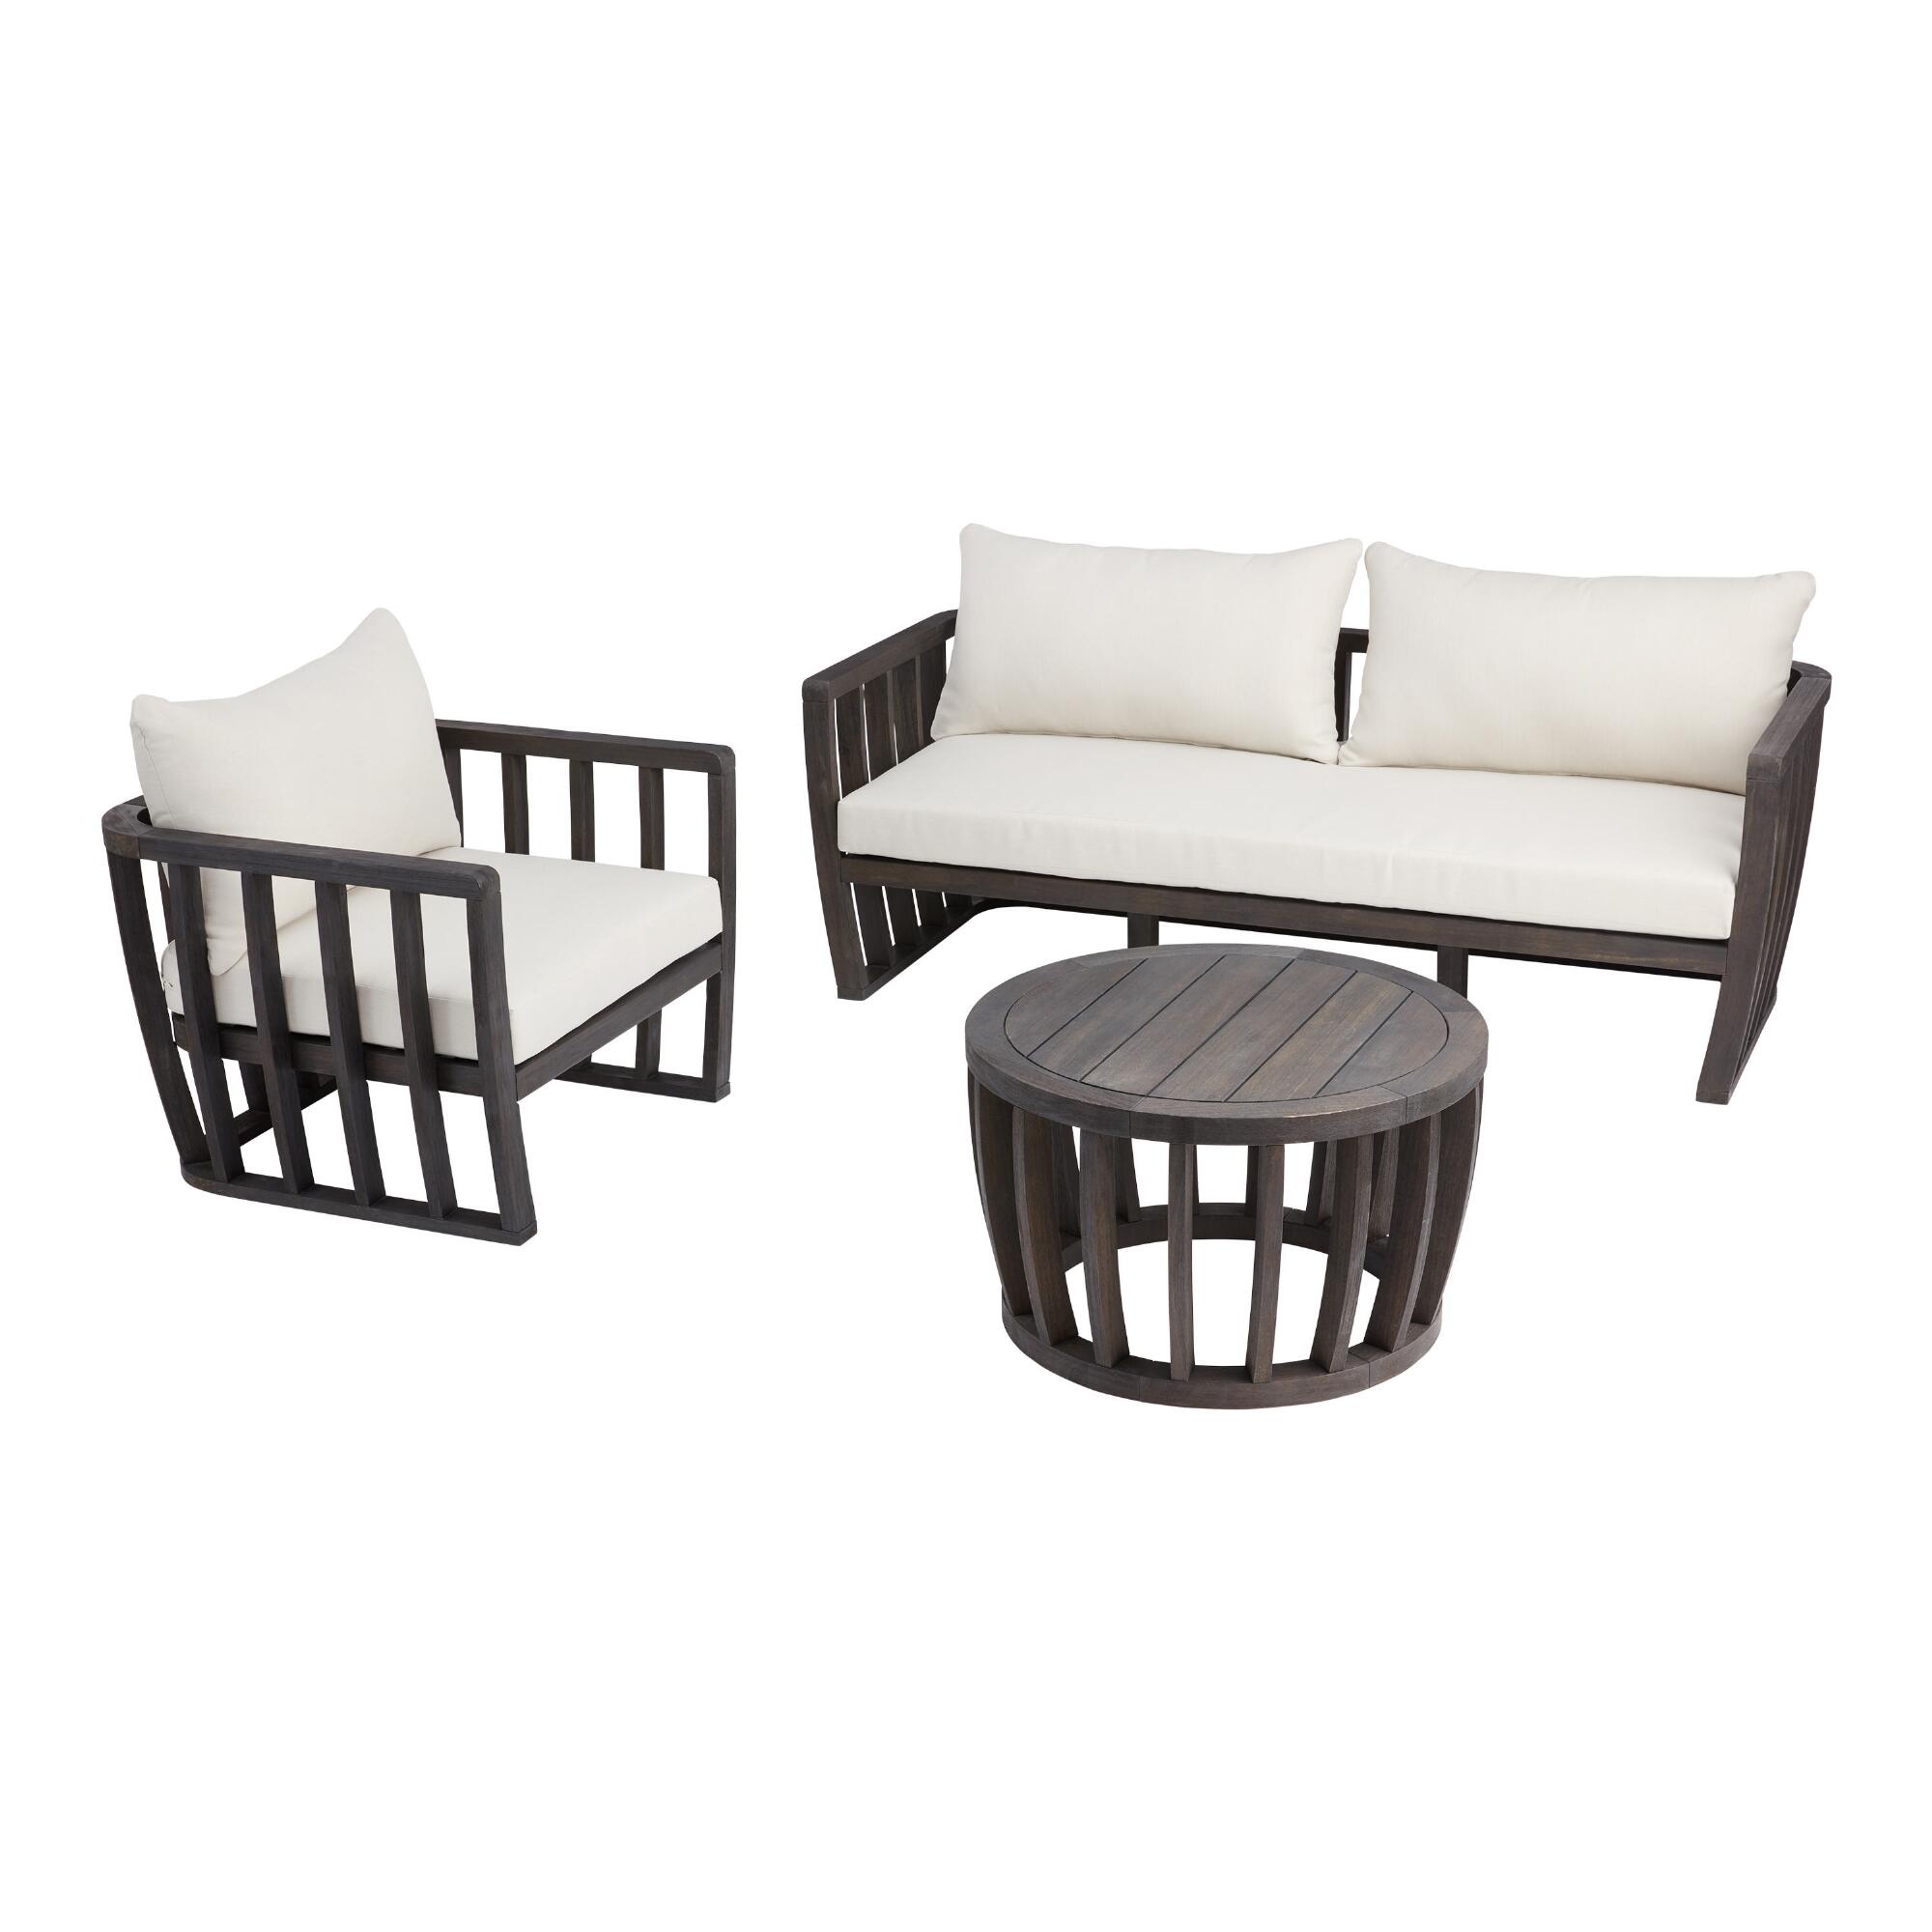 Dark Gray Barrel Wood Byron Outdoor Patio Furniture Collection by World Market